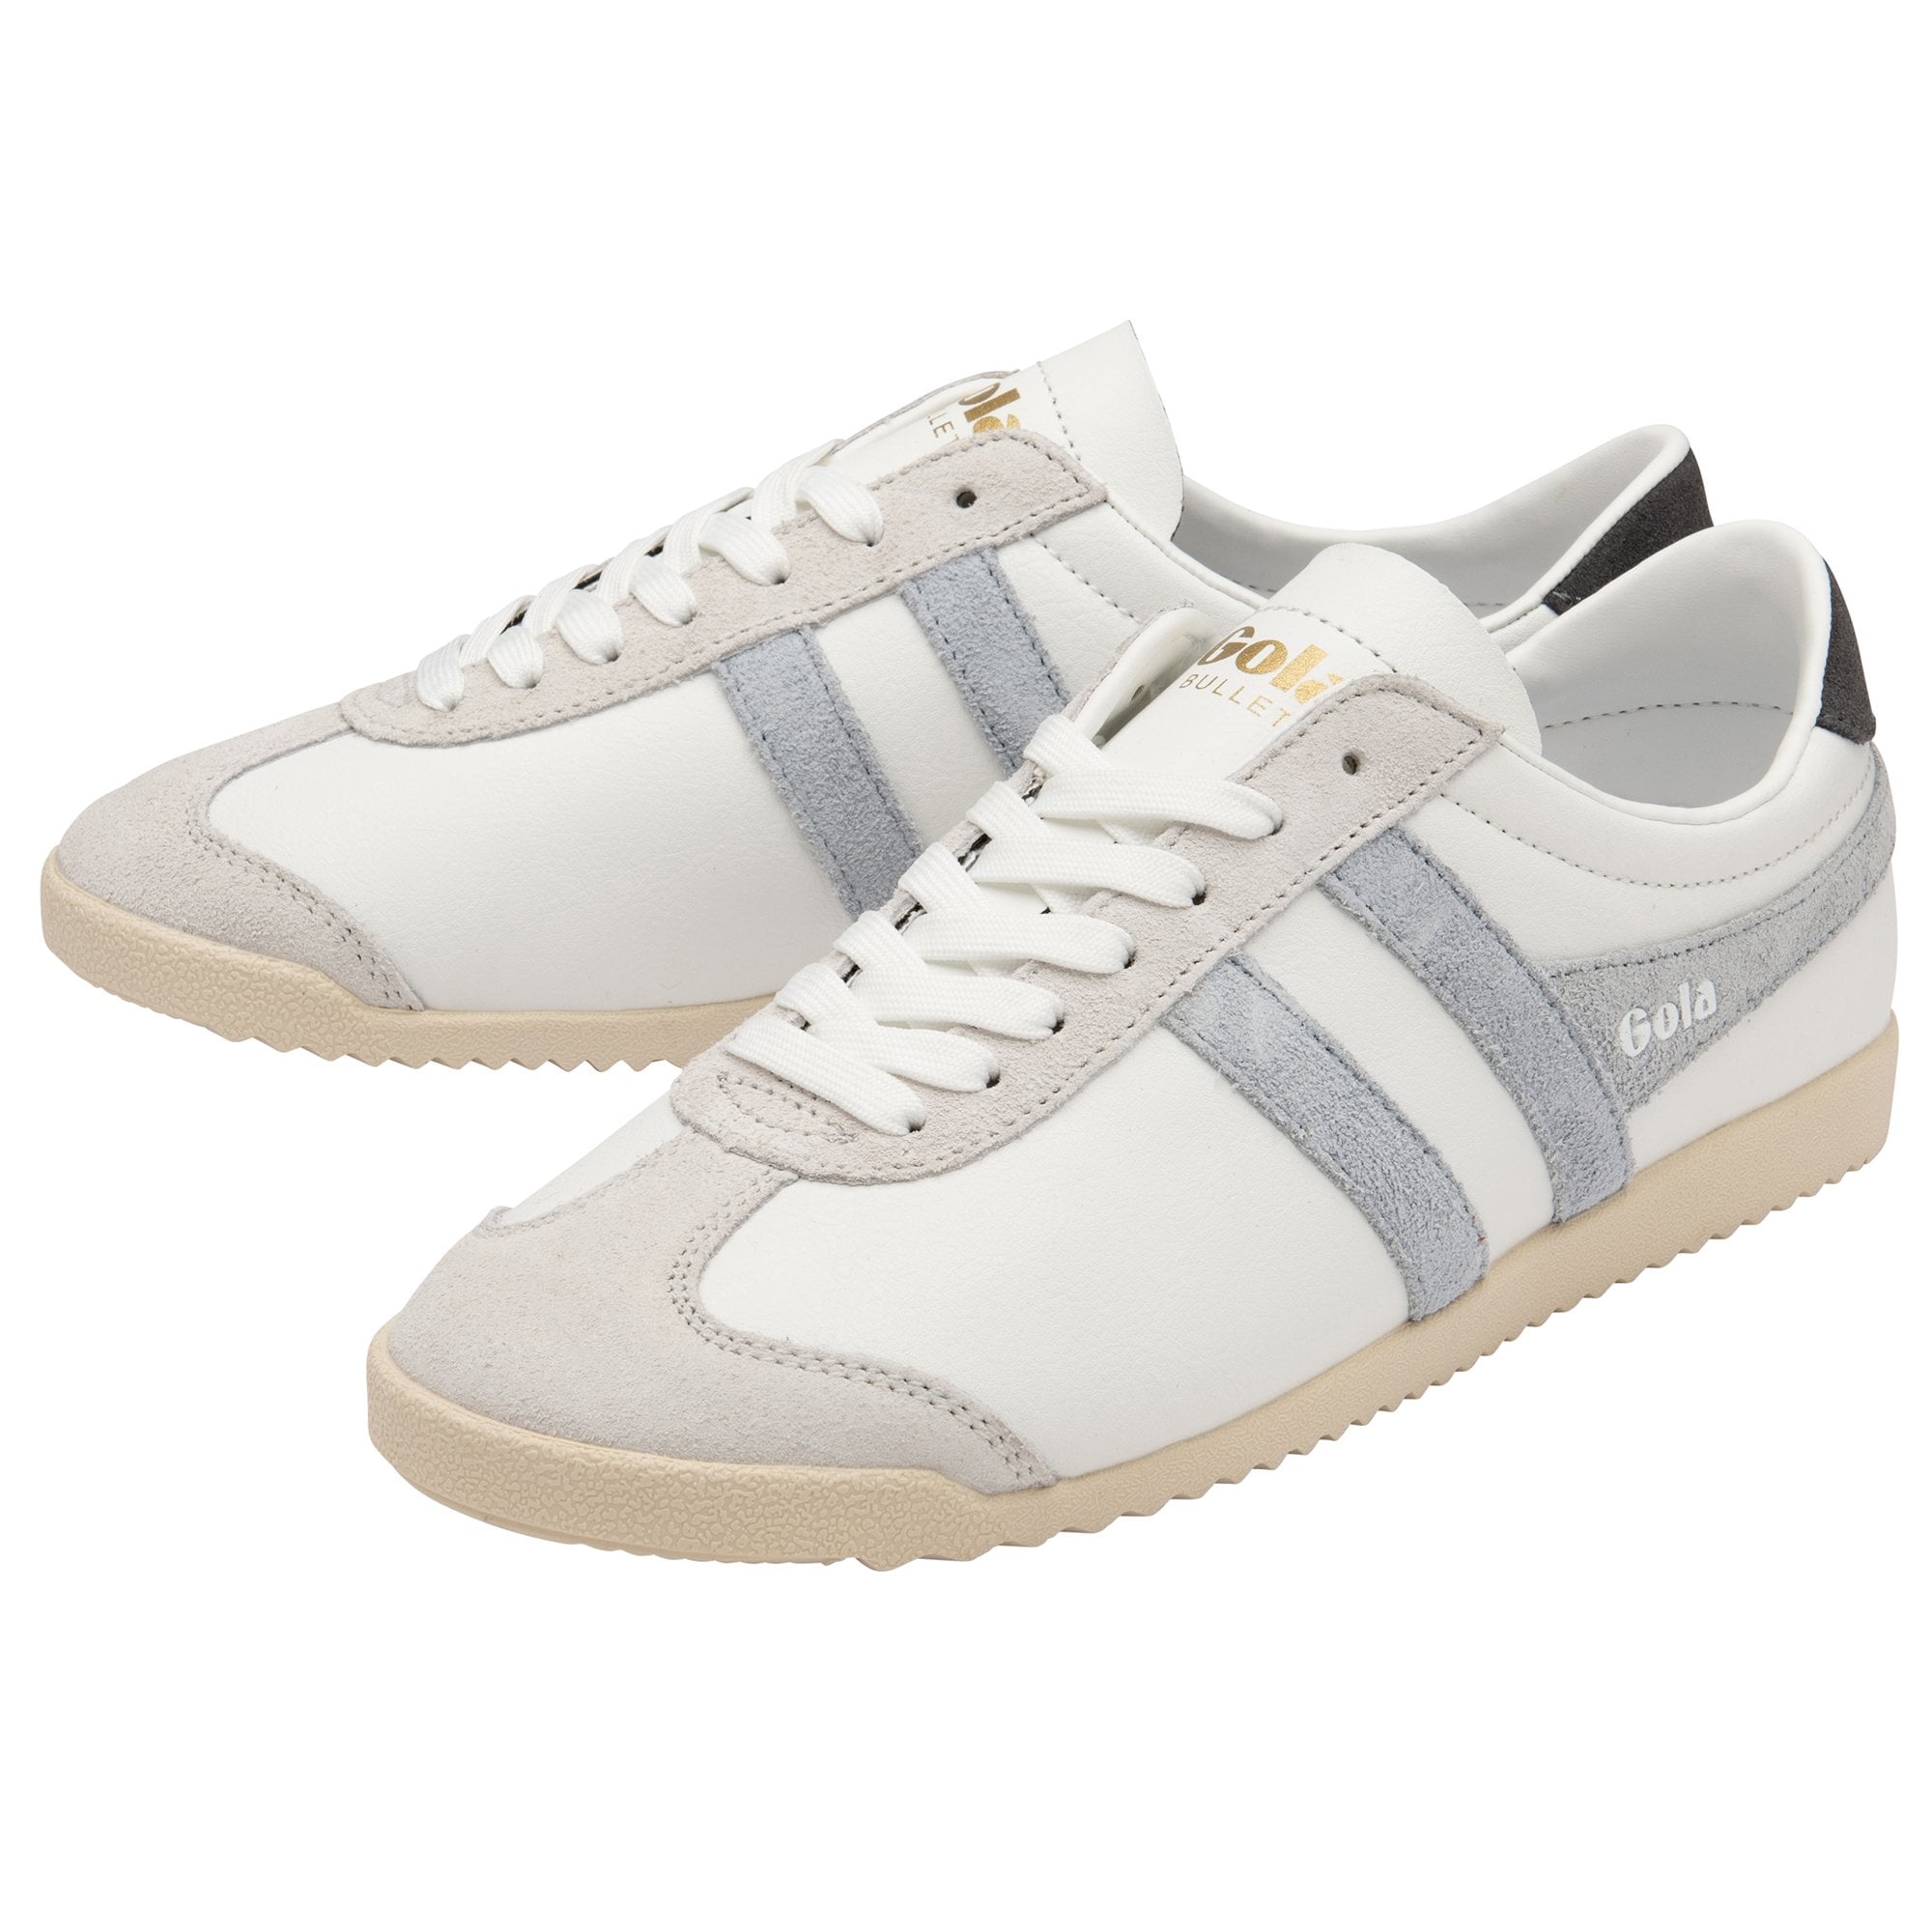 Gola Classics Women's Sneaker Bullet Pure Trainers in Ice Blue 